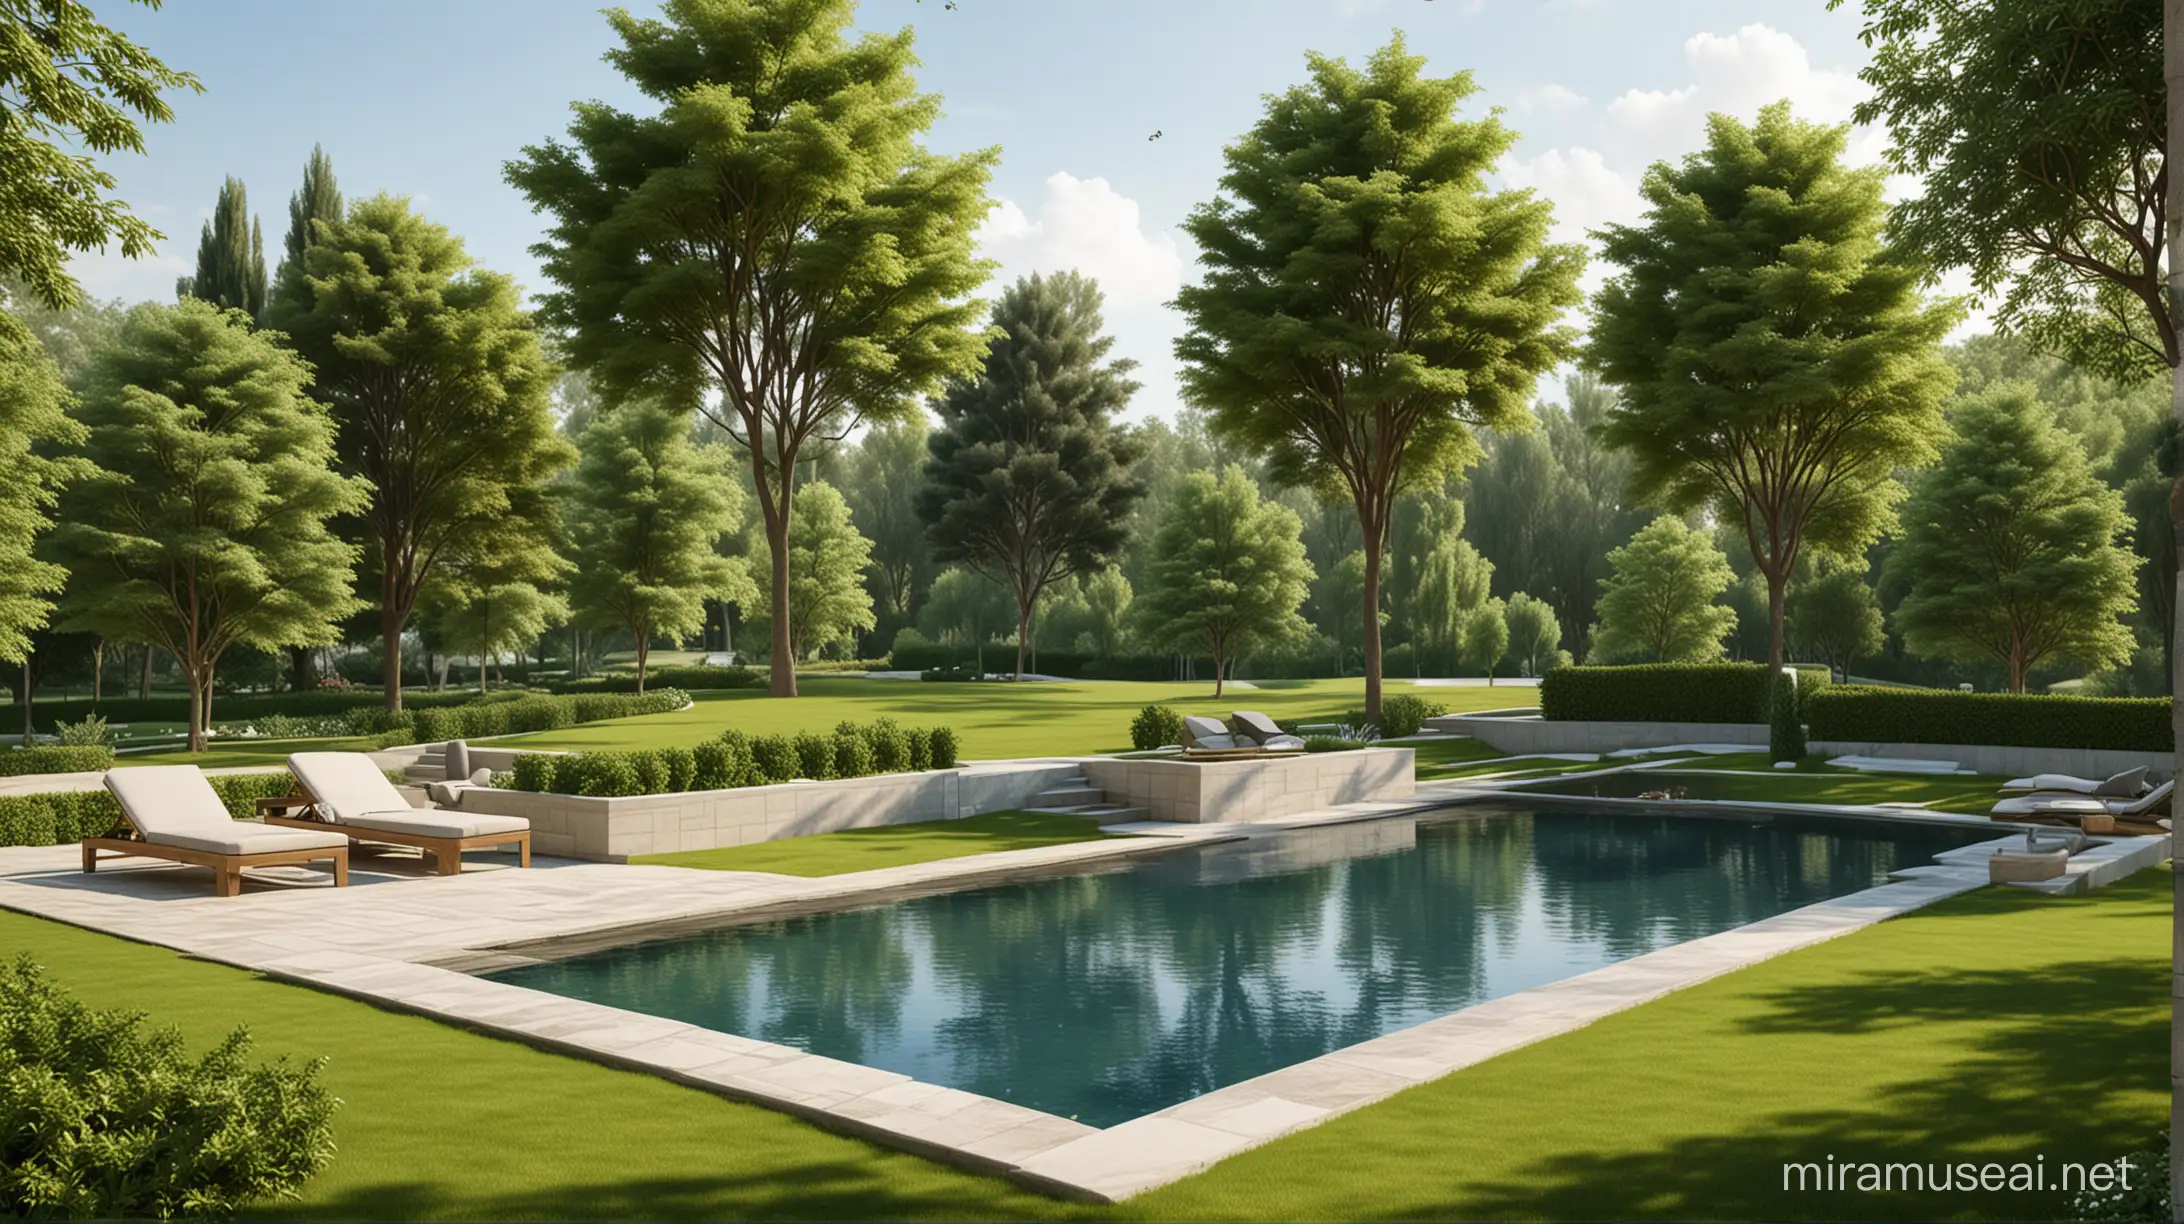 landscape design for a villa with slope roof. The trees in the area must have a good canopy. A water body to soothe the environment. A medium lawn area, with an infinity pool with a fireplace surrounded by sitting area.